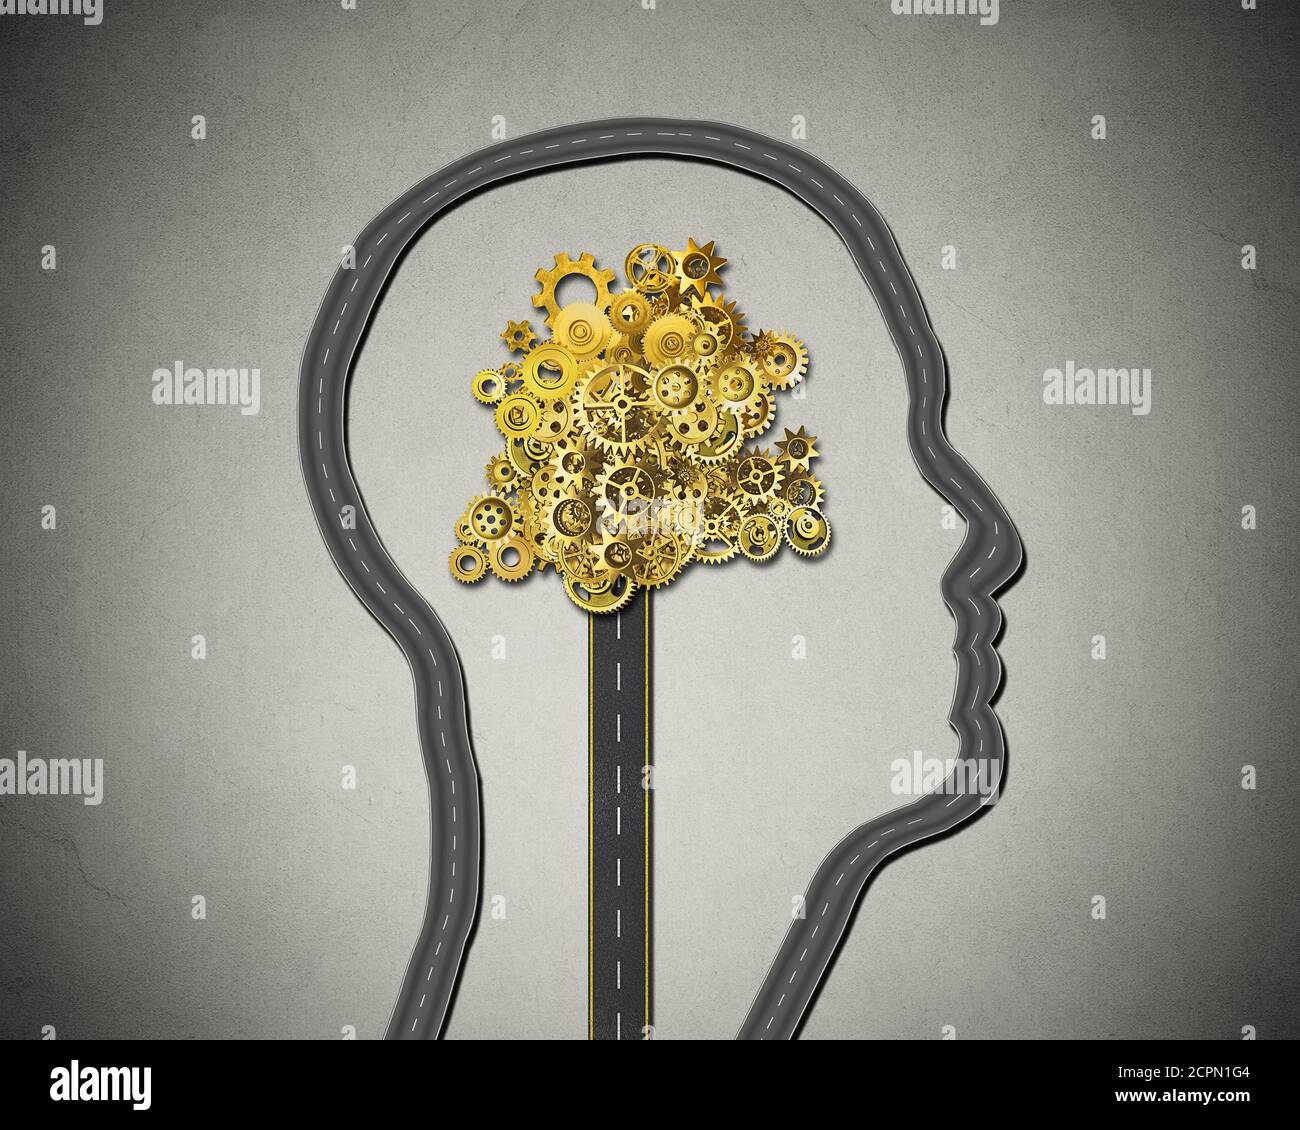 Human intelligence. Road shaped as human face with cogs and gears mechanism Business strategy and psychological mental neurological activity concept Stock Photo